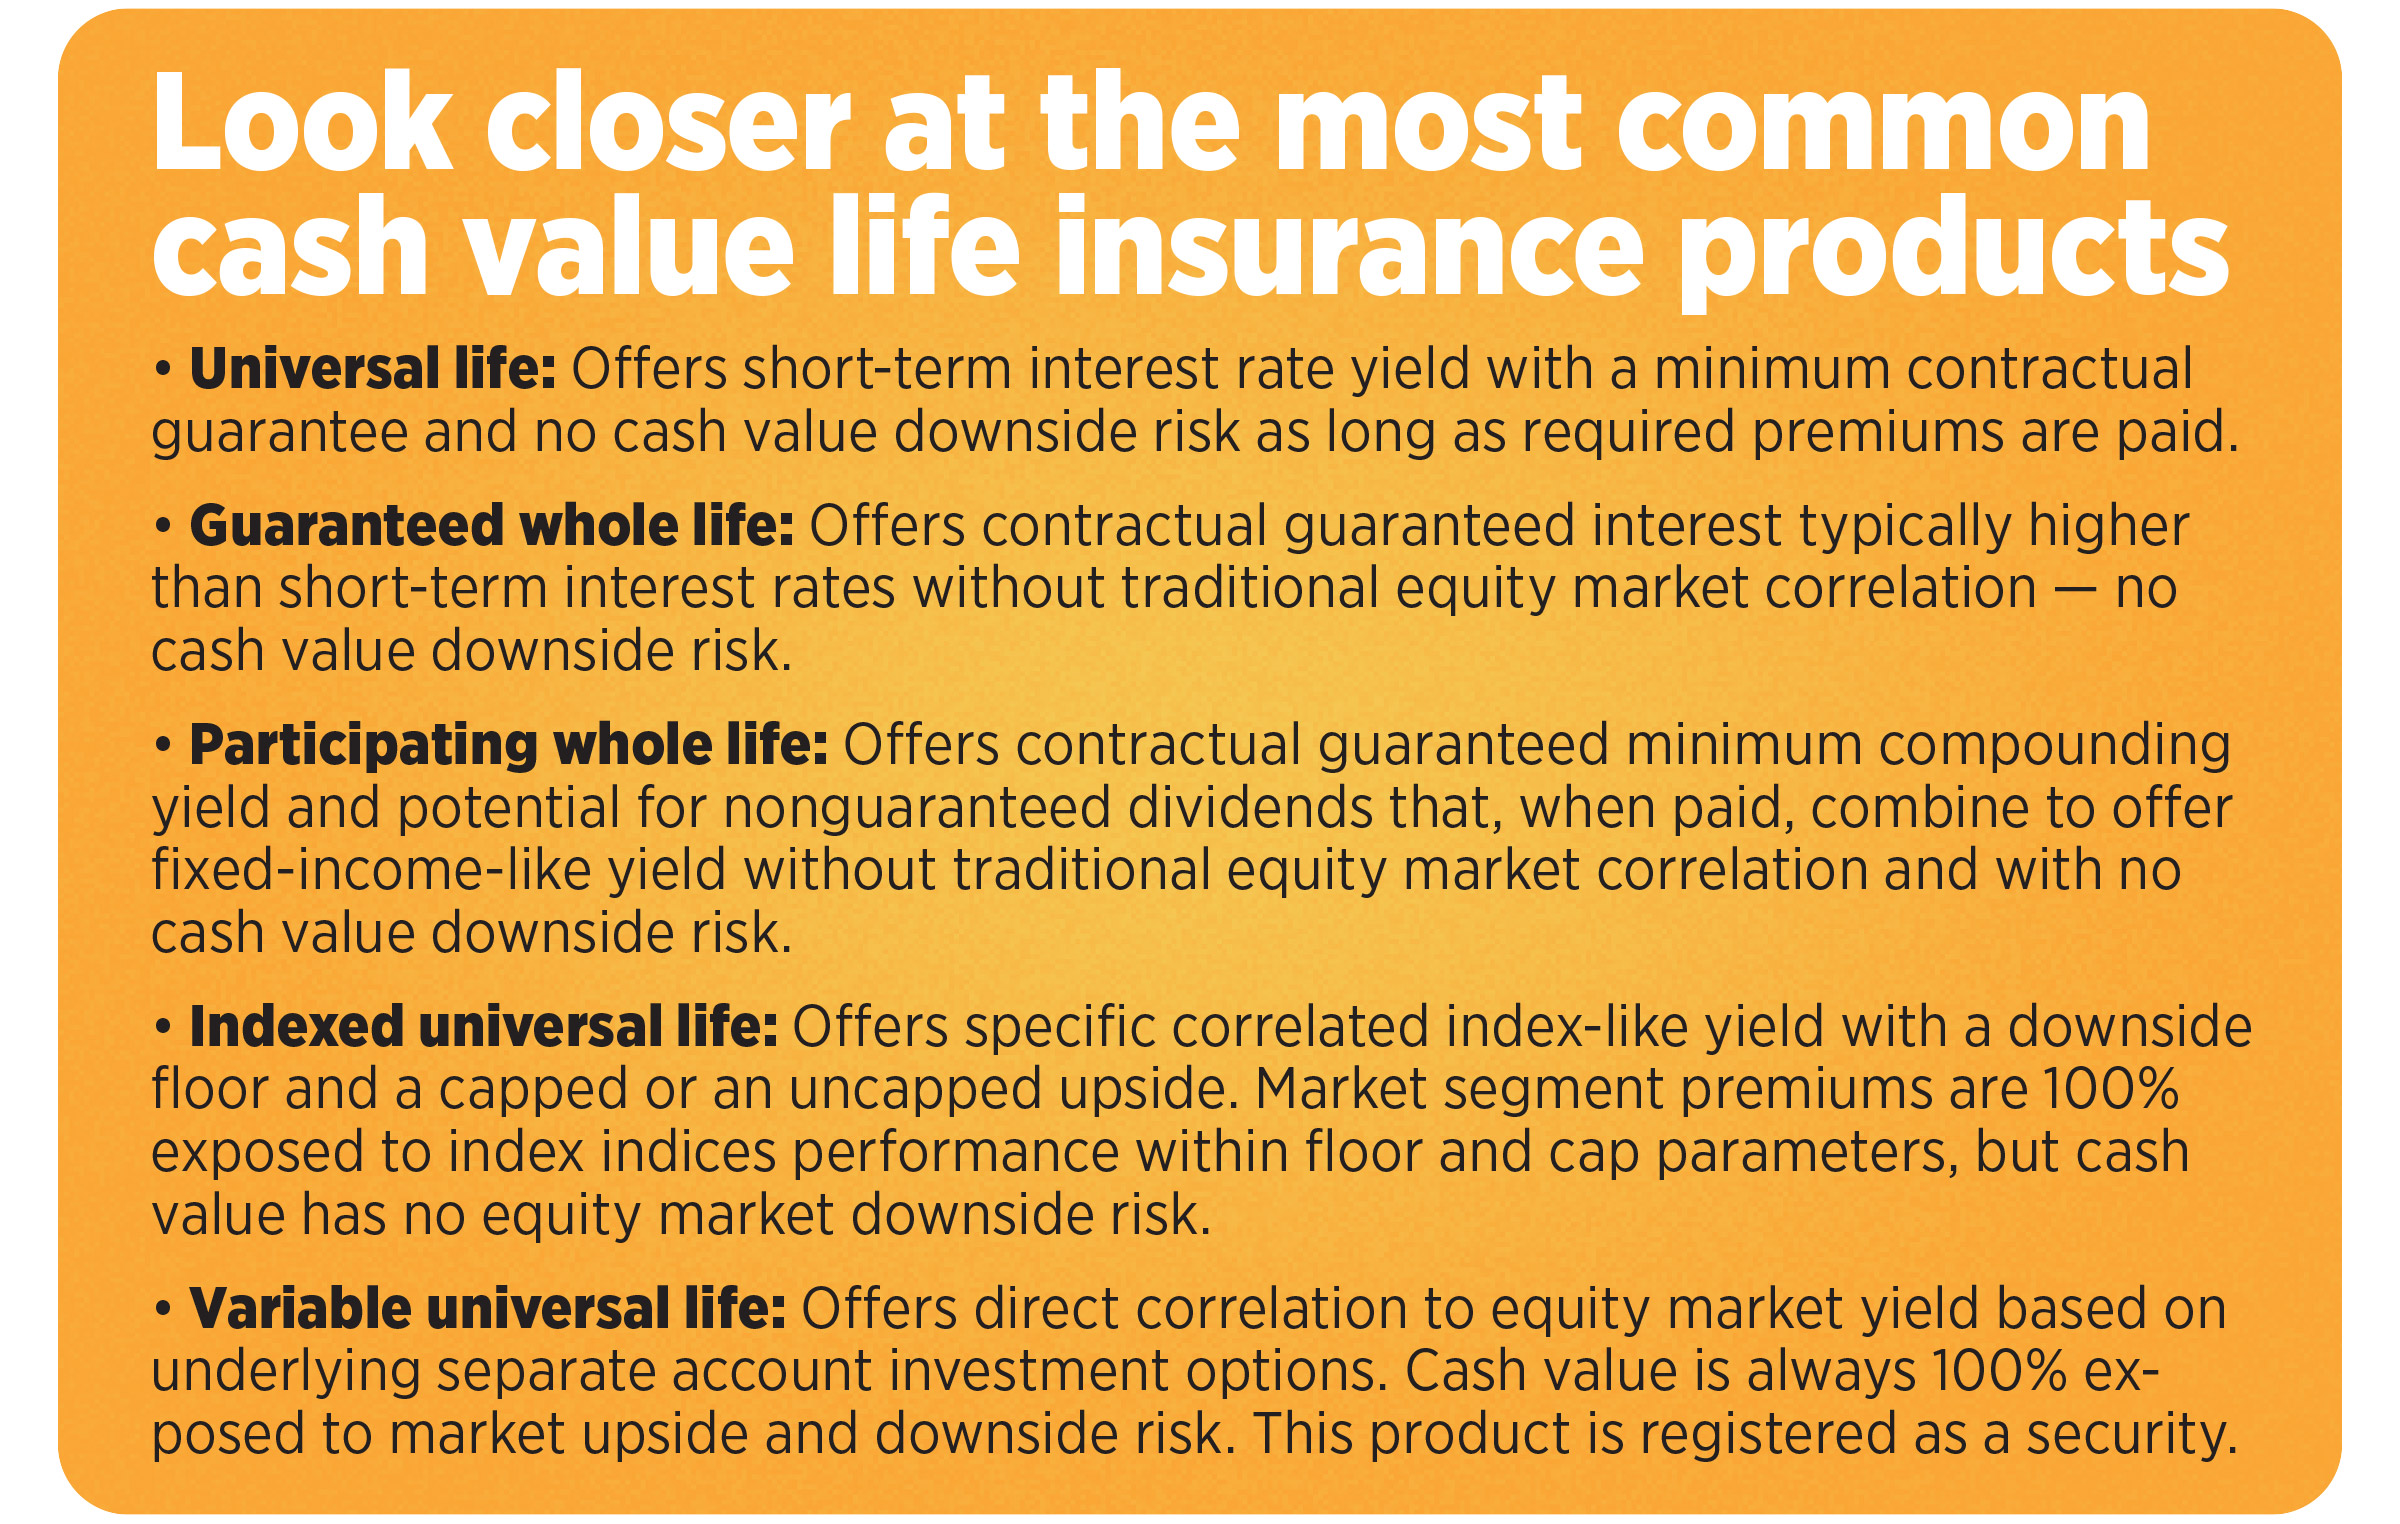 Look closer at the most common cash value life insurance products
• Universal life: Offers short-term interest rate yield with a minimum contractual guarantee and no cash value downside risk as long as required premiums are paid.
• Guaranteed whole life: Offers contractual guaranteed interest typically higher than short-term interest rates without traditional equity market correlation - no cash value downside risk.
• Participating whole life: Offers contractual guaranteed minimum compounding yield and potential for nonguaranteed dividends that, when paid, combine to offer fixed-income-like vield without traditional equity market correlation and with no cash value downside risk.
• Indexed universal life: Offers specific correlated index-like yield with a downside floor and a capped or an uncapped upside. Market segment premiums are 100% exposed to index indices performance within floor and cap parameters, but cash value has no equity market downside risk.
• Variable universal life: Offers direct correlation to equity market vield based on underlying separate account investment options. Cash value is always 100% exposed to market upside and downside risk. This product is registered as a security.